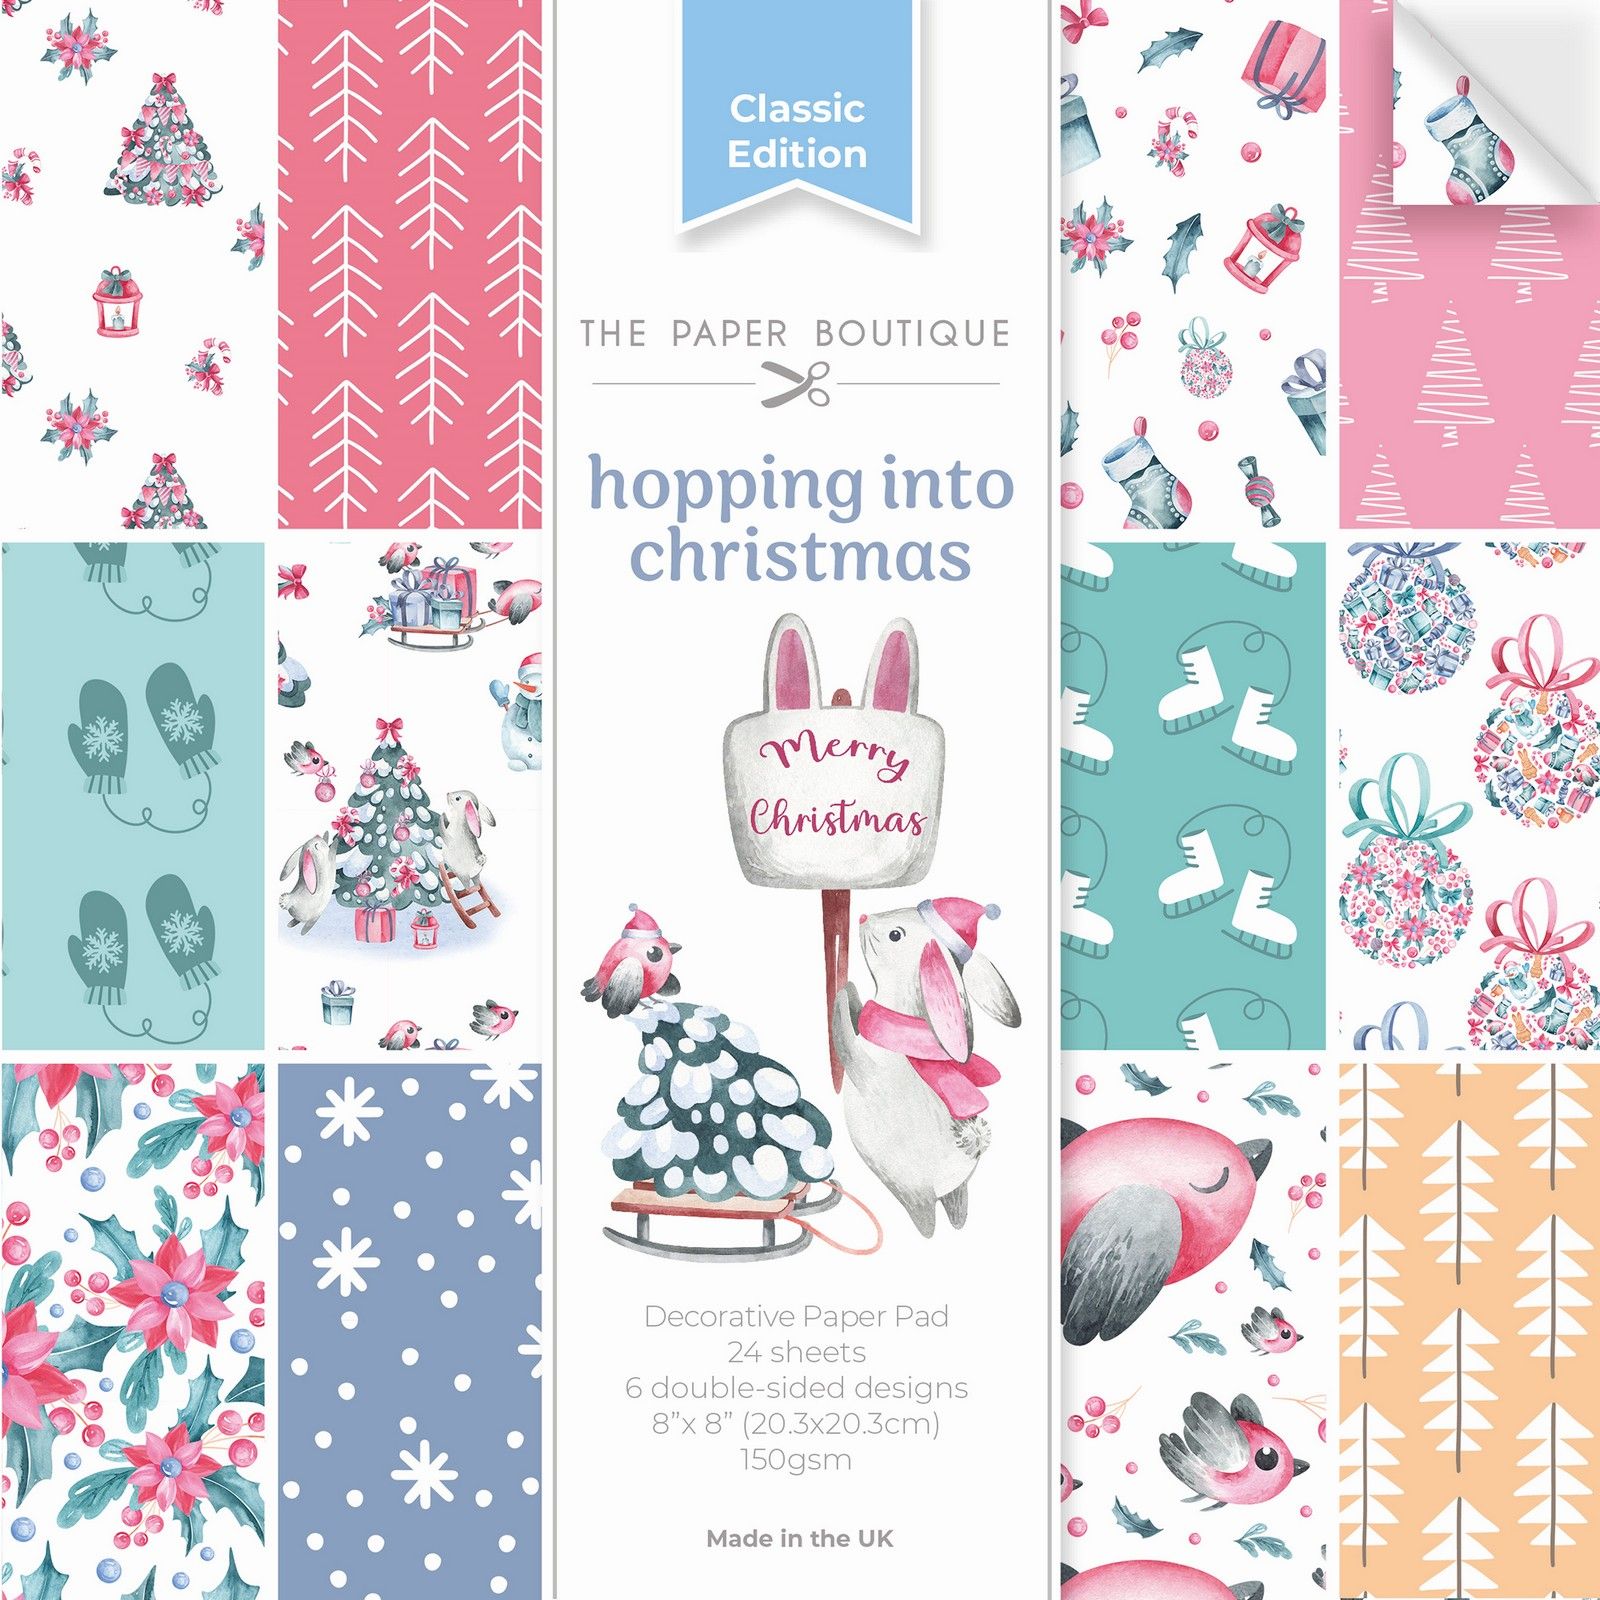 The Paper Boutique • Hopping into Christmas Decorative Paper Pad 20,3x20,3cm